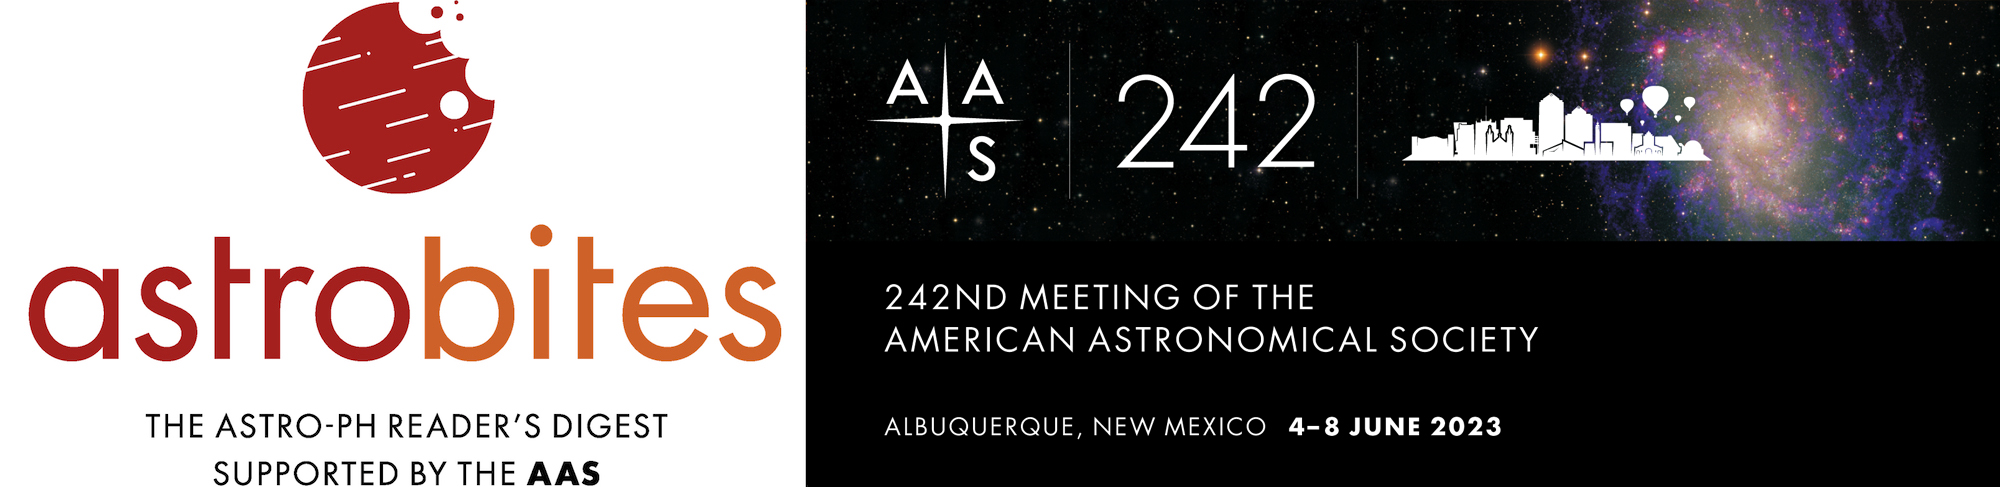 Astrobites logo and AAS 242 banner